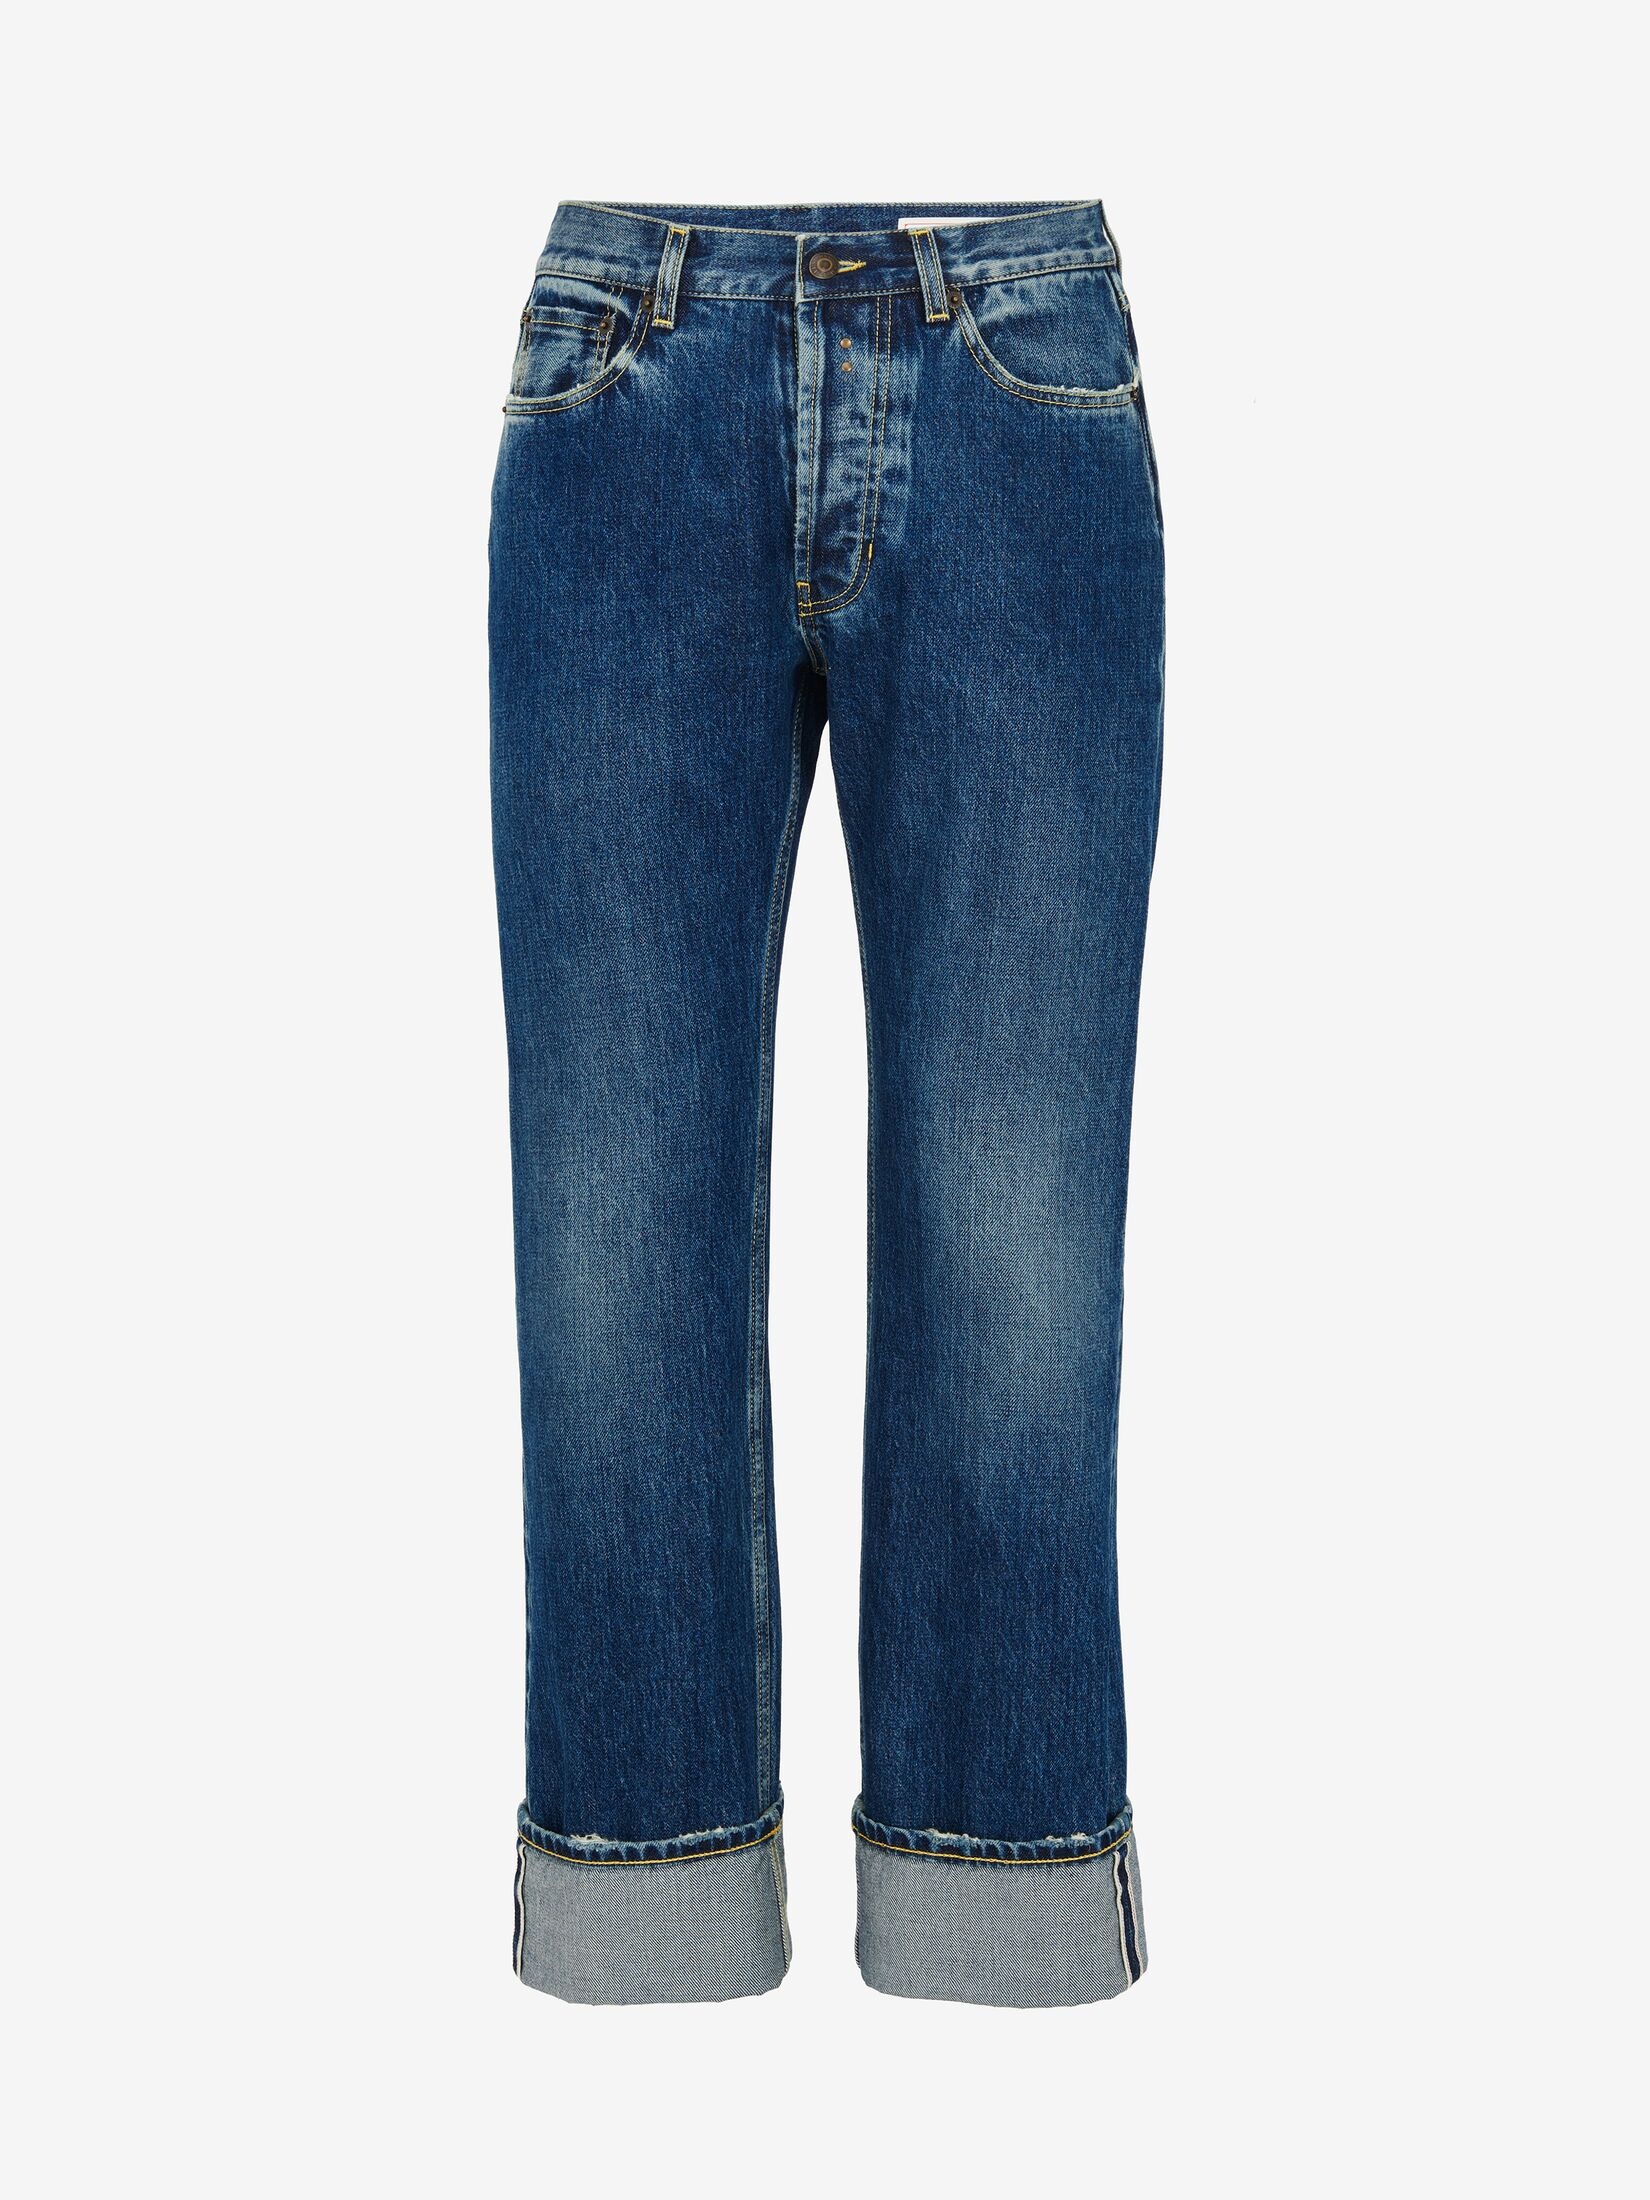 Men's Turn-up Jeans in Washed Blue - 1